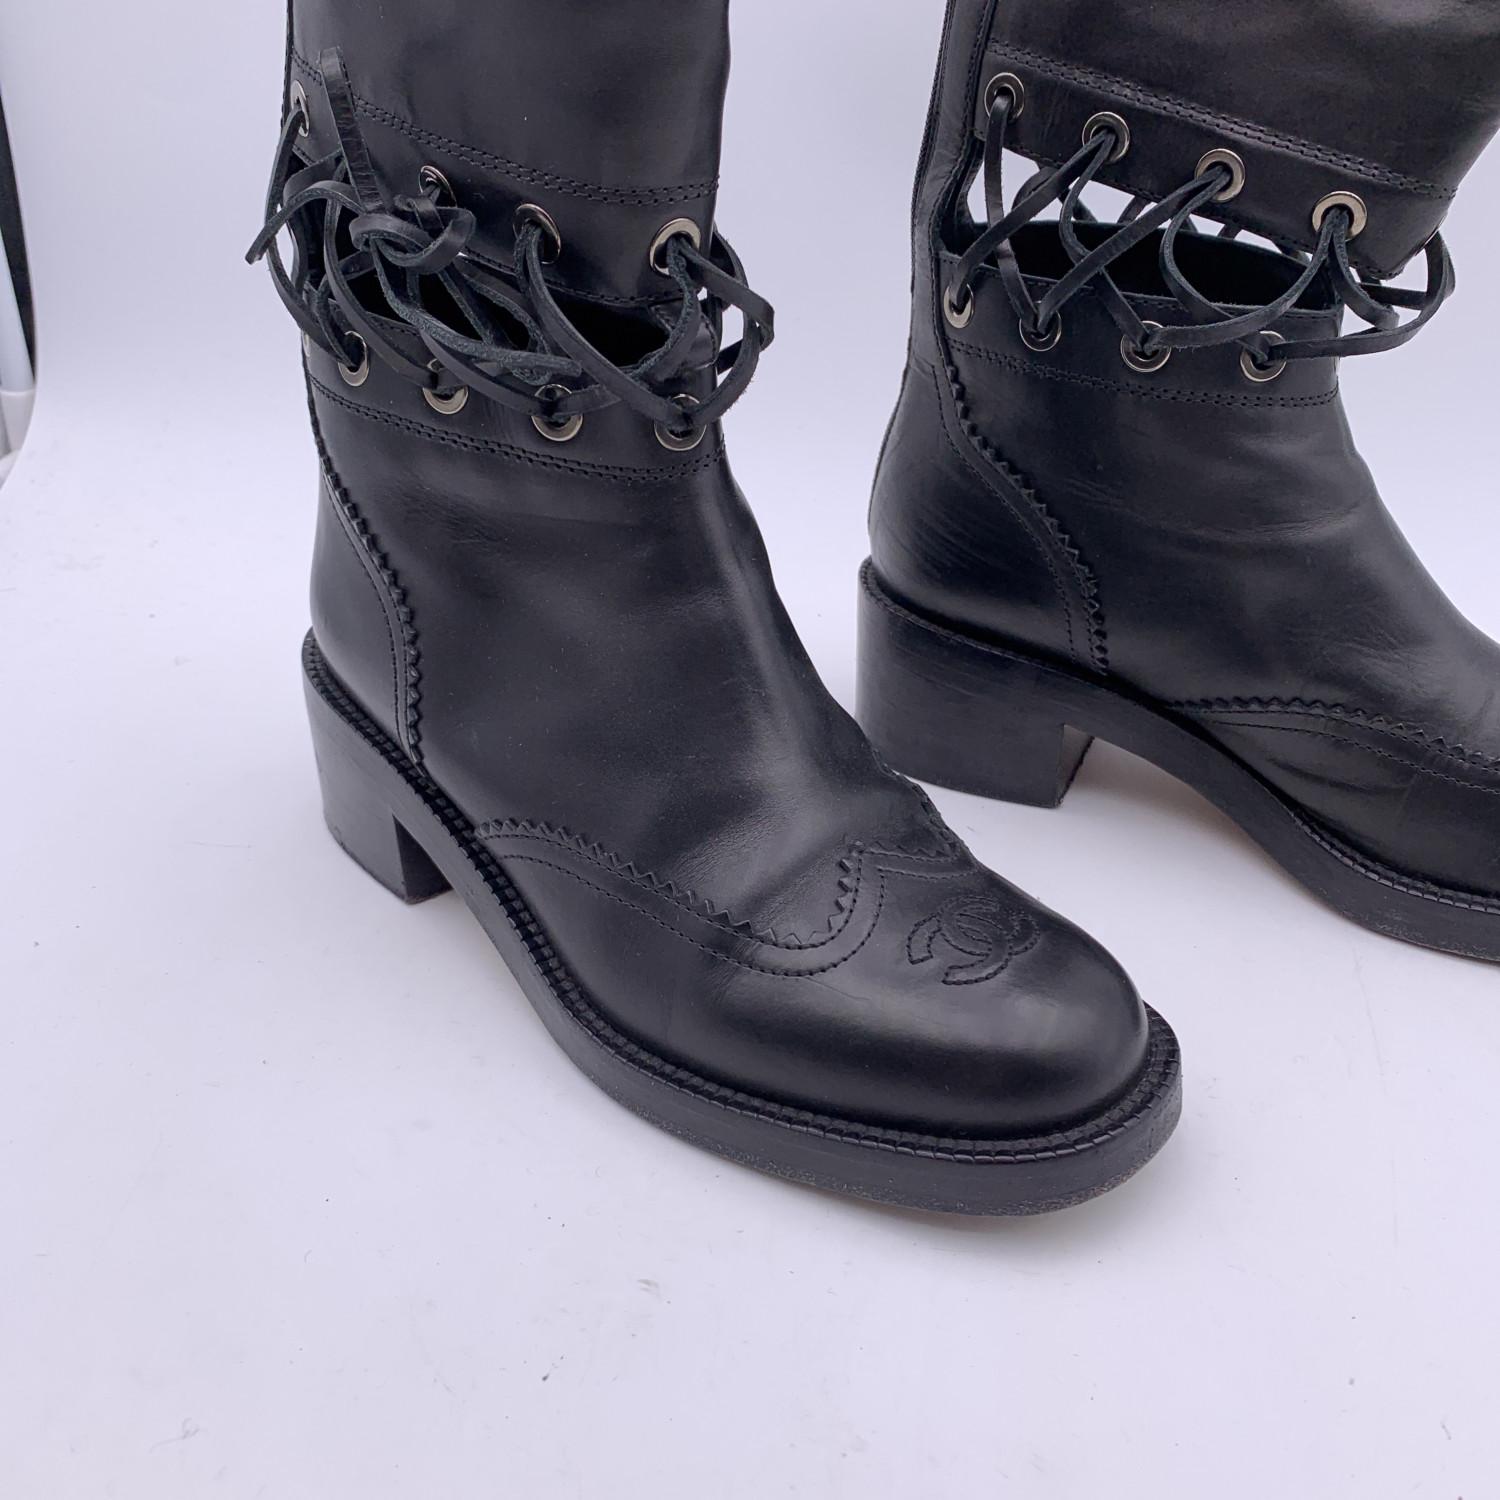 Chanel Black Leather 2016 Lace-Up Cutout CC Knee High Boots Size 38 For Sale 3